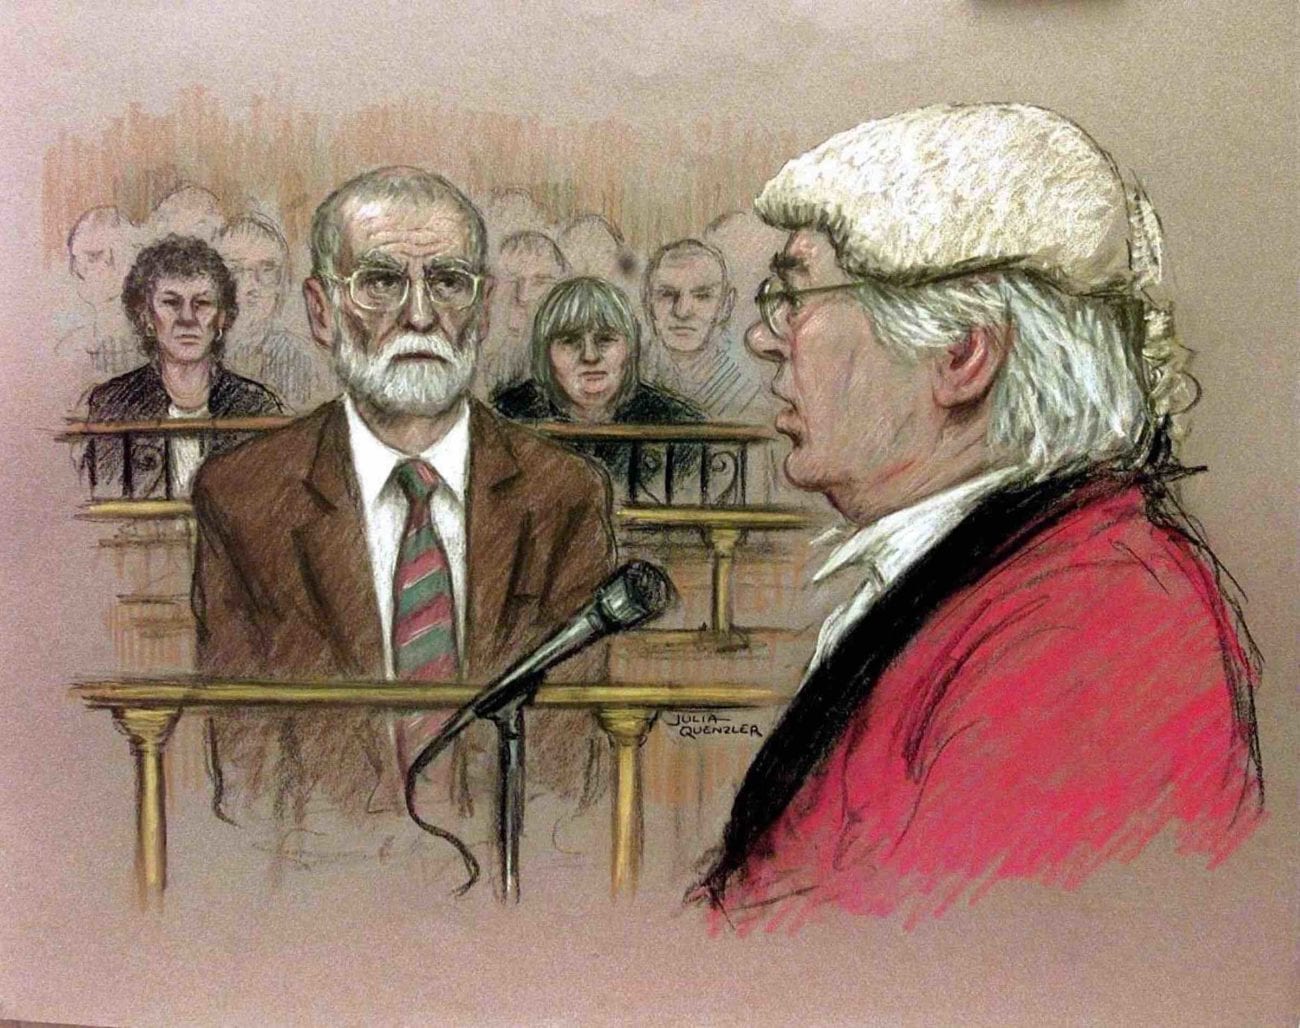 Former doctor and serial killer Harold Shipman murdered at least 215 patients. Here's everything we know about the deadly doctor.